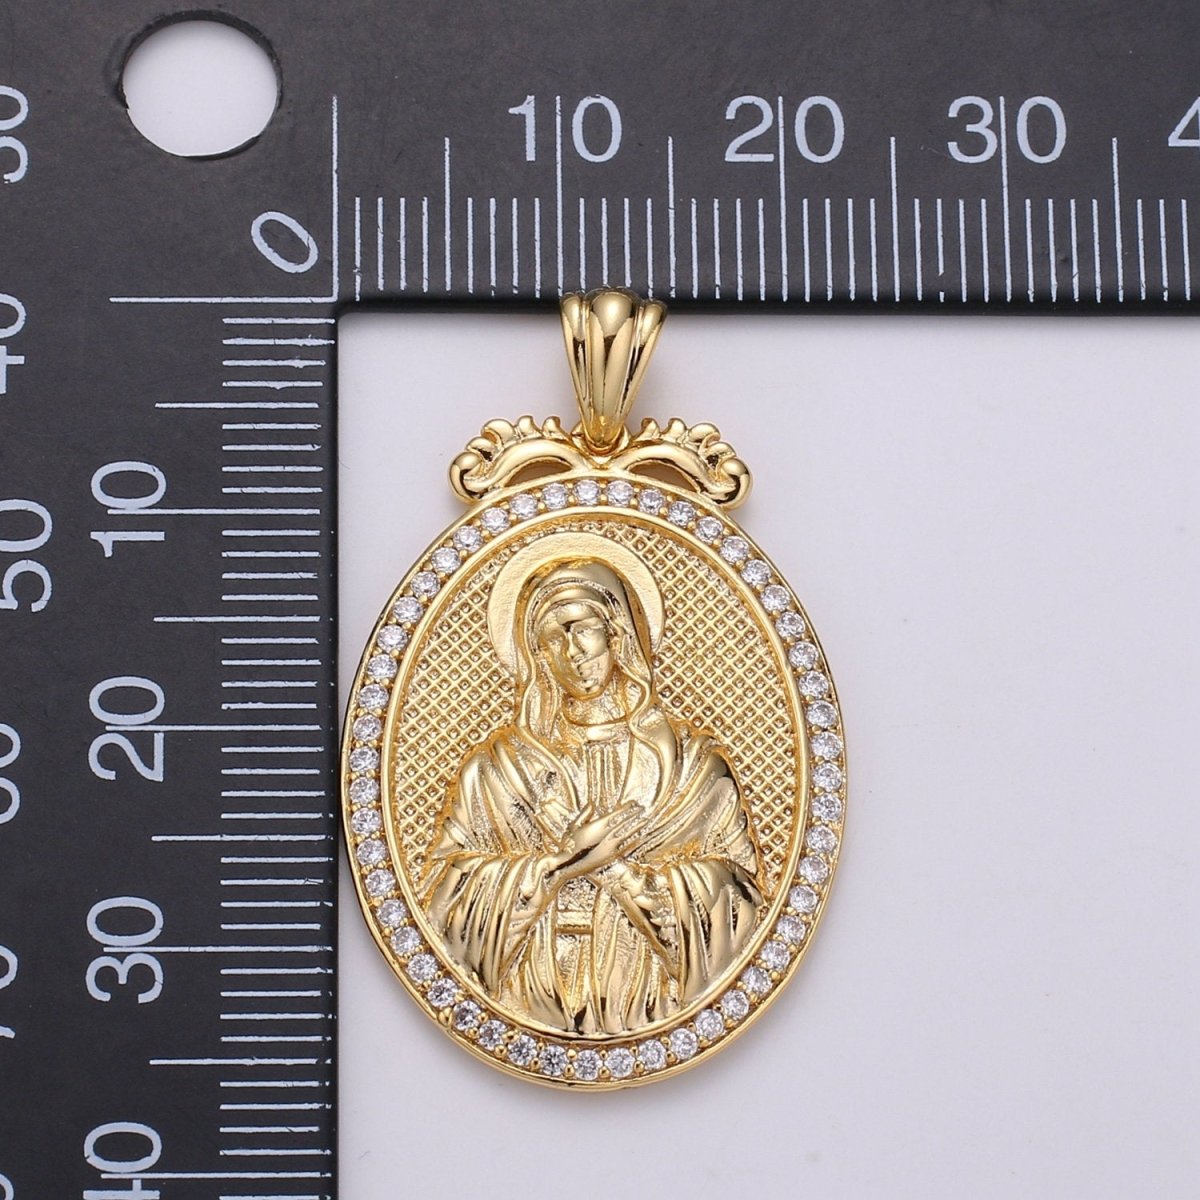 Micro Pave Virgin Mary Pendant Holly Mary 14K Gold Filled Charm Religious medallion, oval pendant, Mother Maria, religious jewelry J-120 - DLUXCA